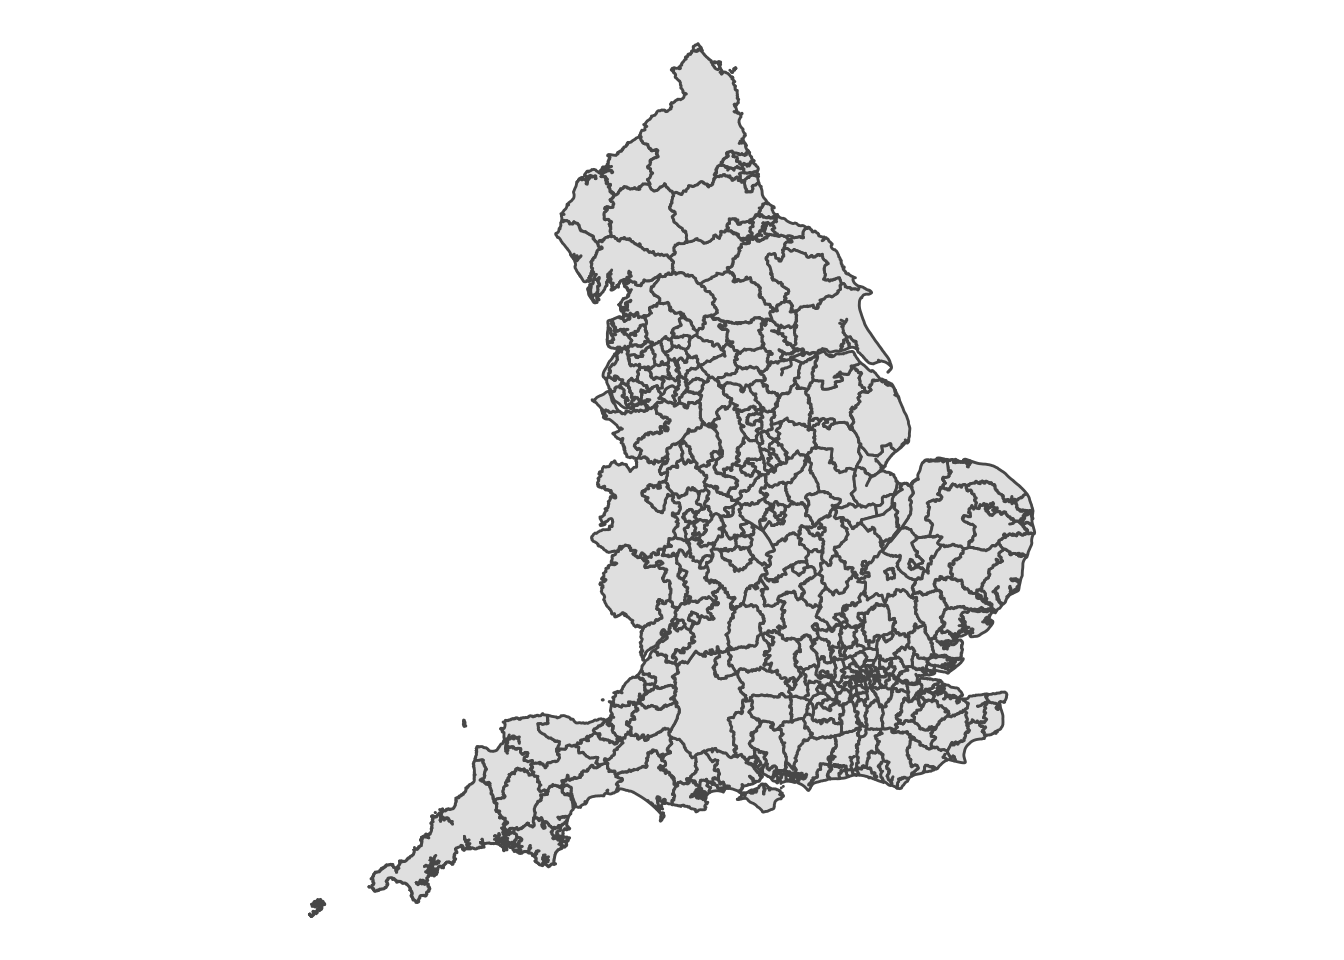 A grey outline of England, and the borders of the Local Authorities, all shaded in light grey.